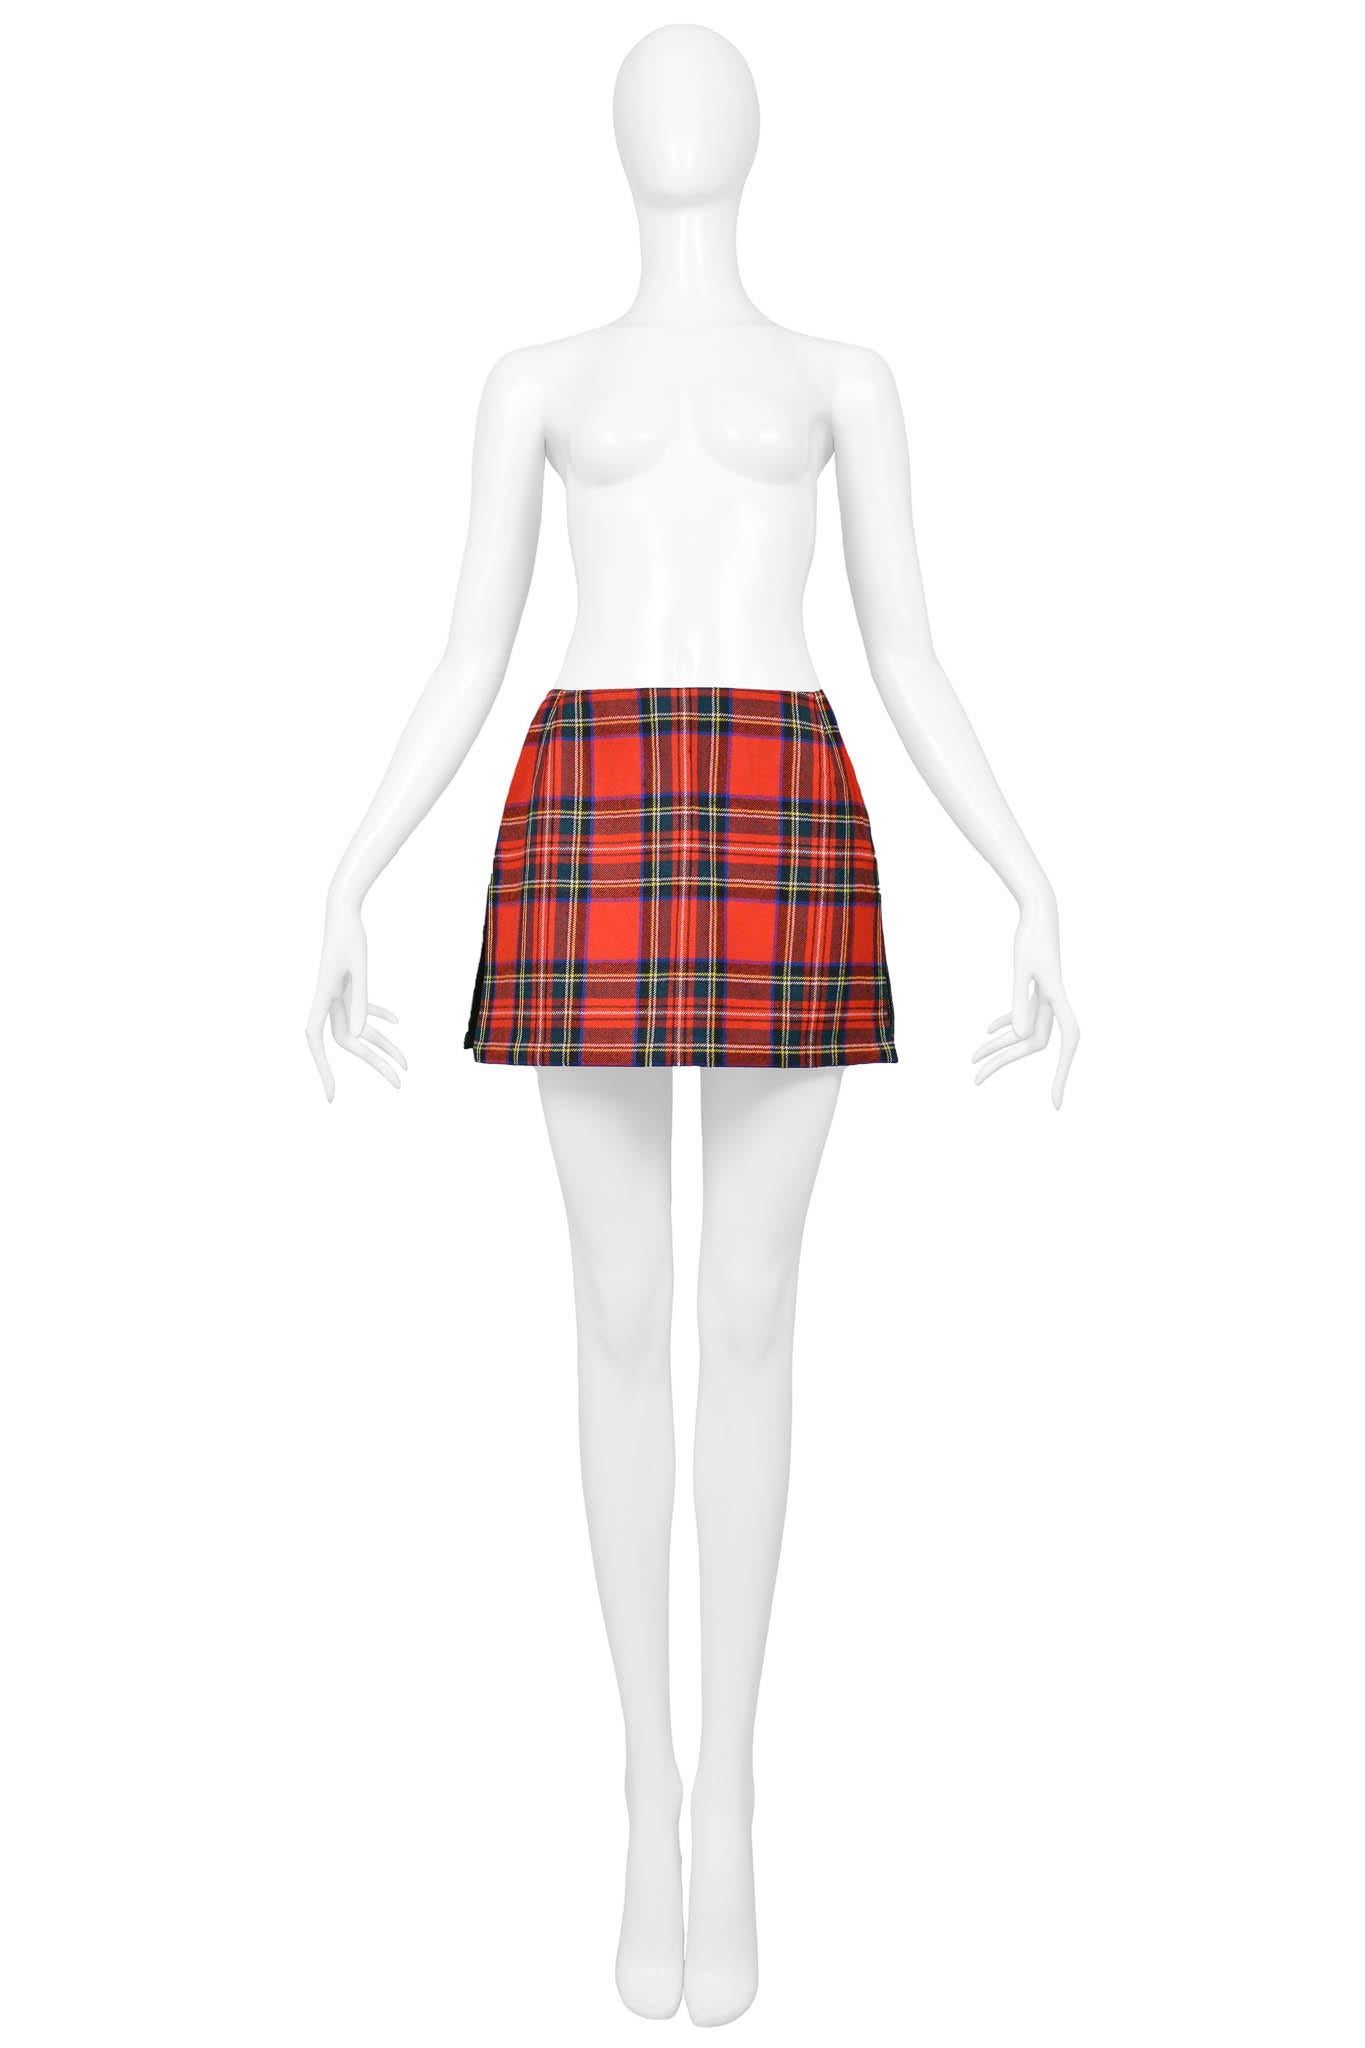 Resurrection Vintage is excited to offer a vintage Dolce & Gabbana (with original tags) mini skirt featuring a plaid front, velcro side closure, red topstitching design, and pockets on the back.

Dolce & Gabbana
Size: 38
Fabric: Wool, Cotton,